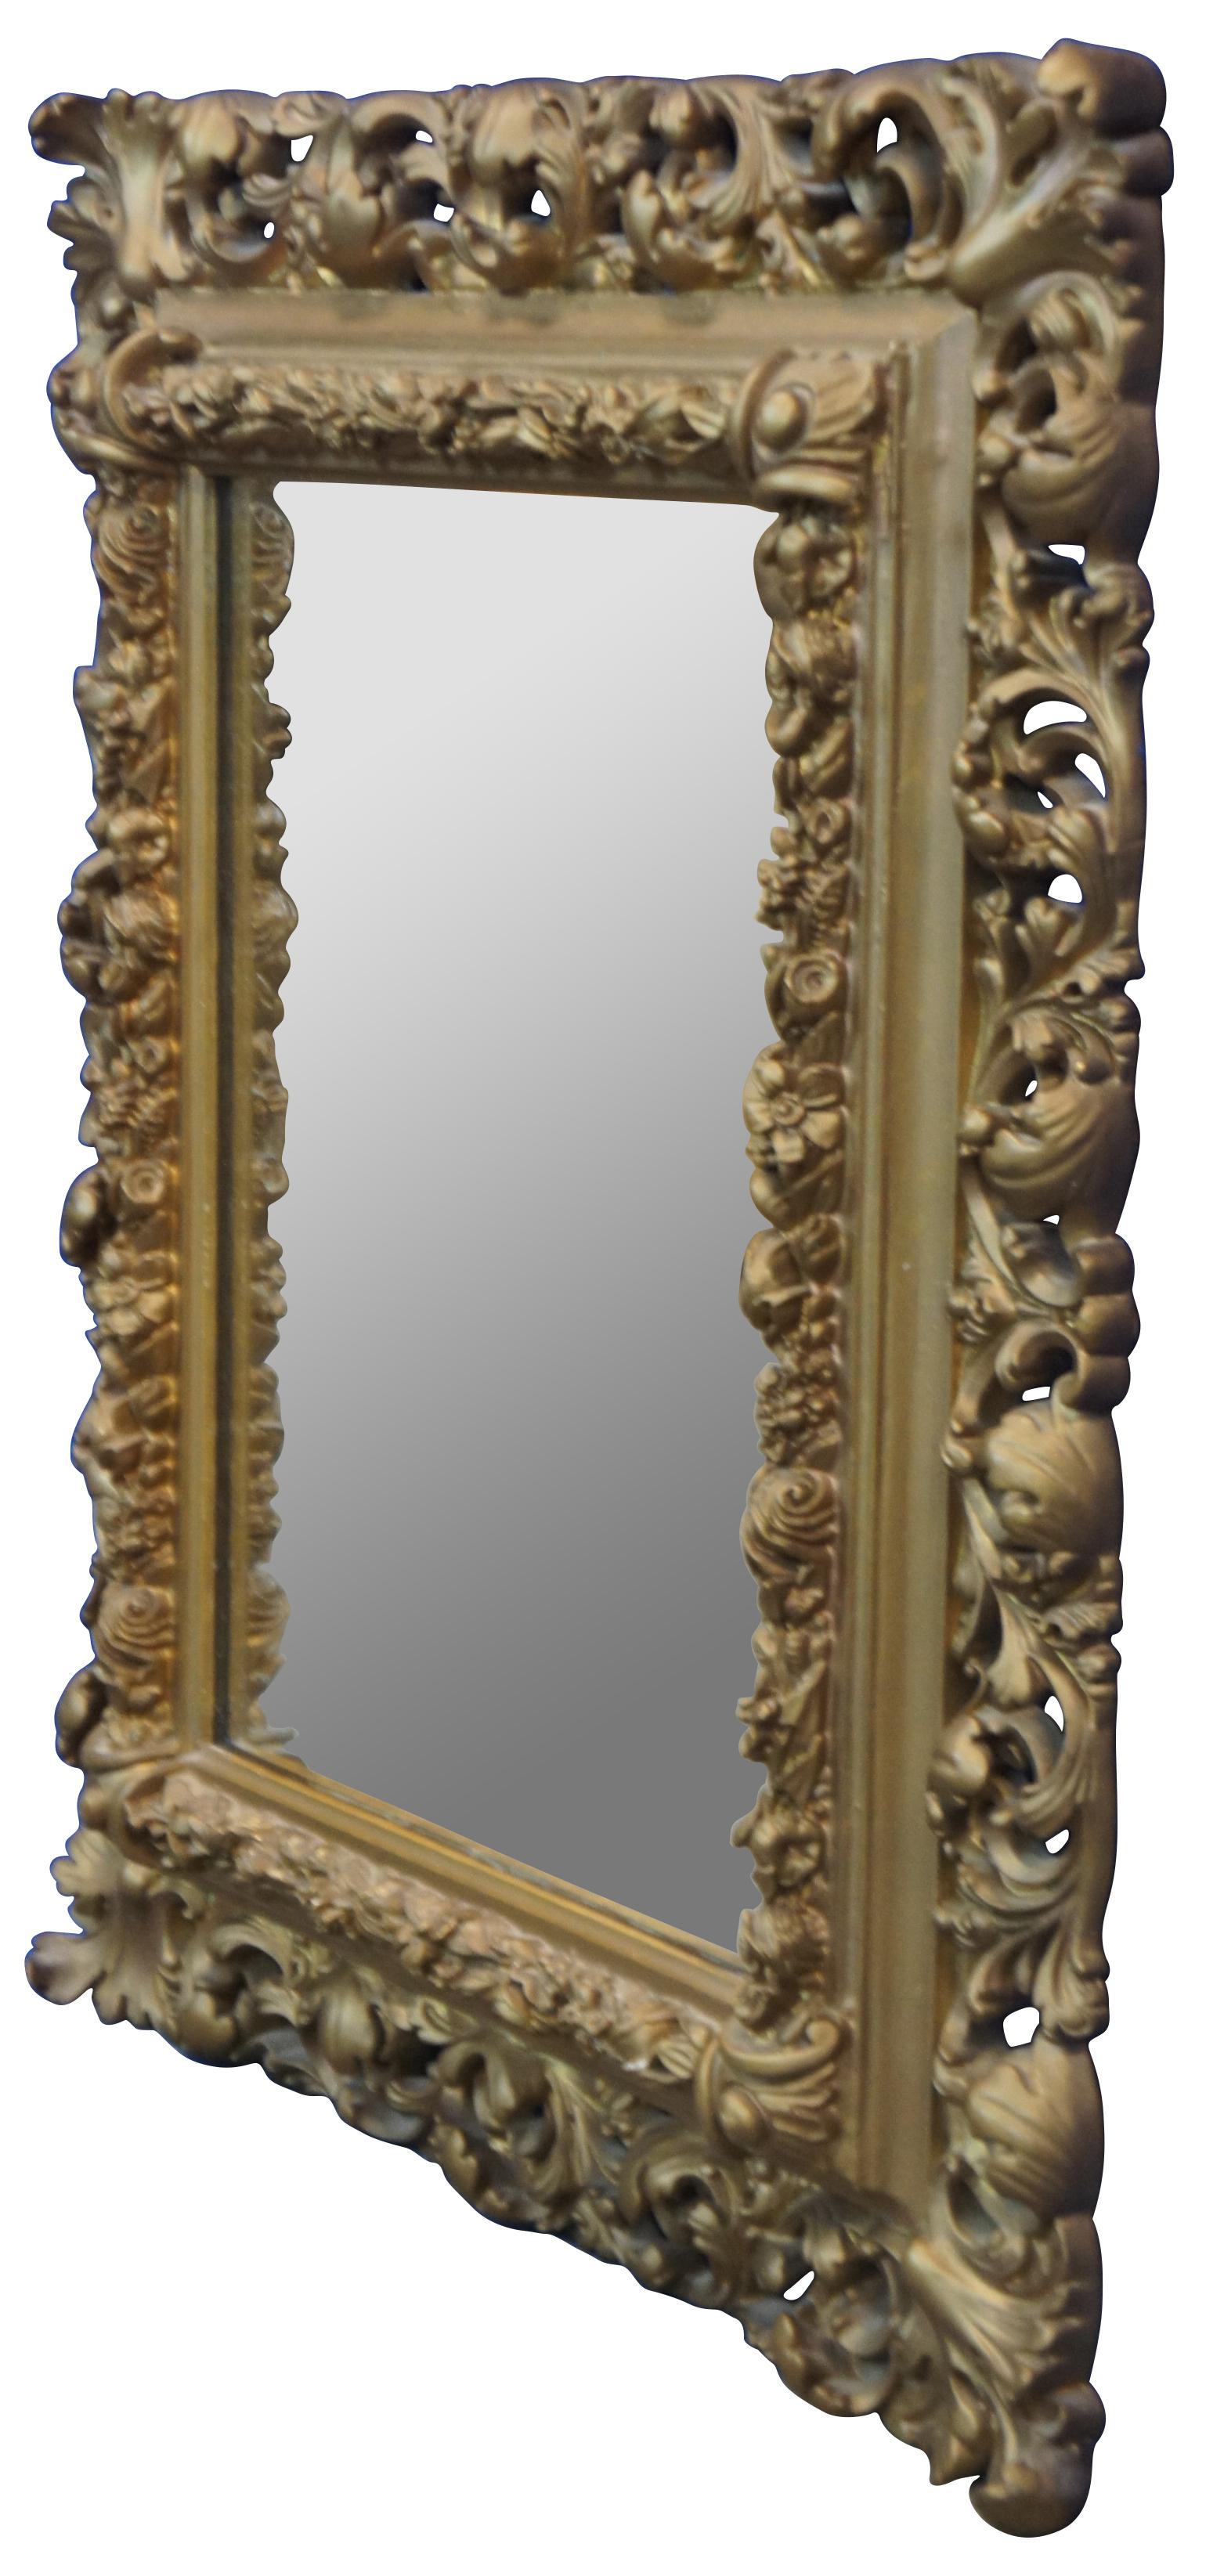 Pair of Antique French Baroque / Rococo gilt mirrors with rectangular form featuring molded frames decorated with small pierced or reticulated flowers and large swirling leaves.

Measures: 19.5” x 2” x 23” / Mirror - 11.5” x 14.75” (Width x Depth